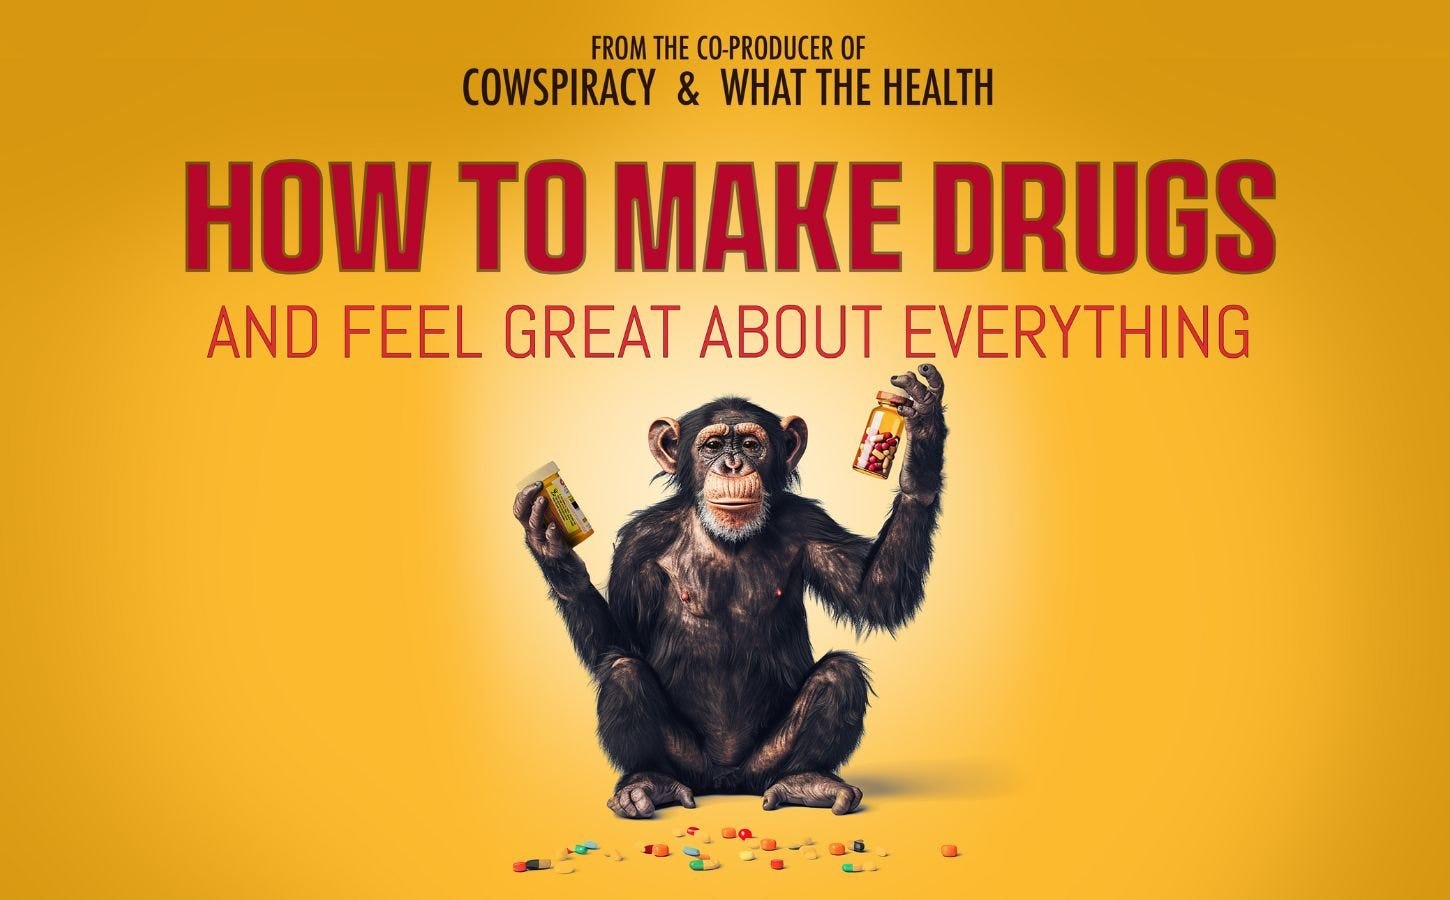 ‘Cowspiracy’ Co-Director Announces New Film: ‘How To Make Drugs’